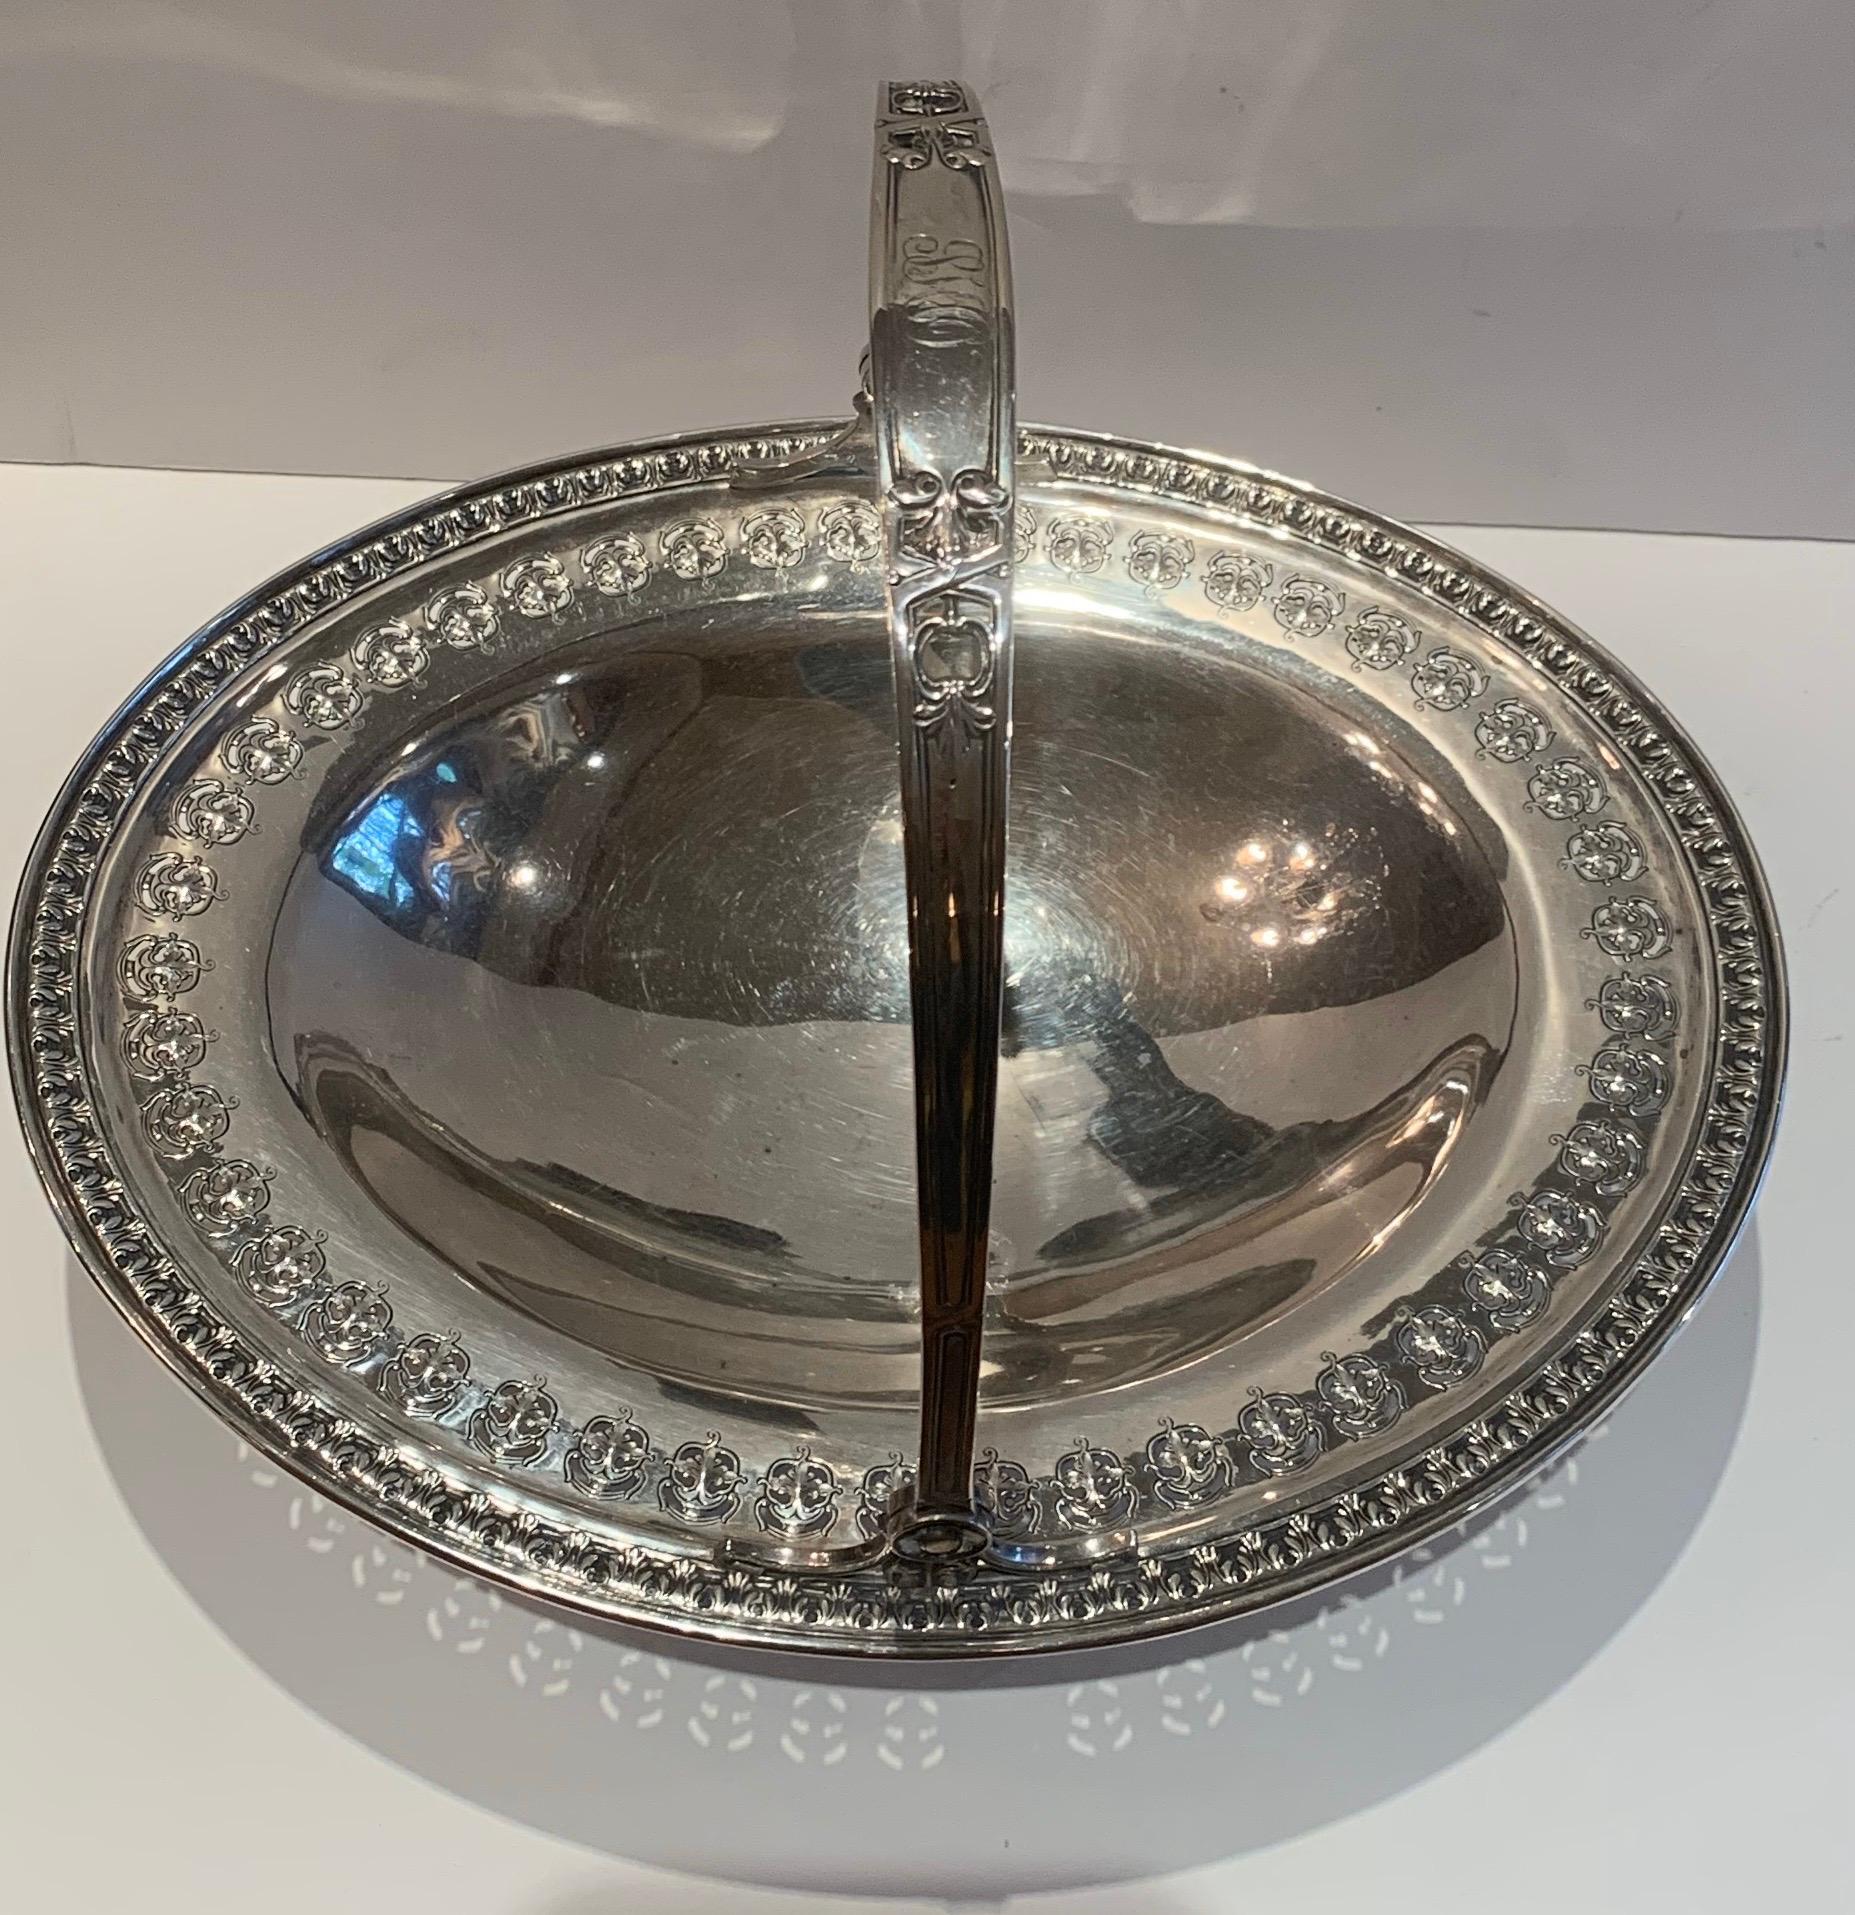 Wonderful Large Oval Sterling Silver Regency Basket Bowl Centerpiece with Handle In Good Condition For Sale In Roslyn, NY